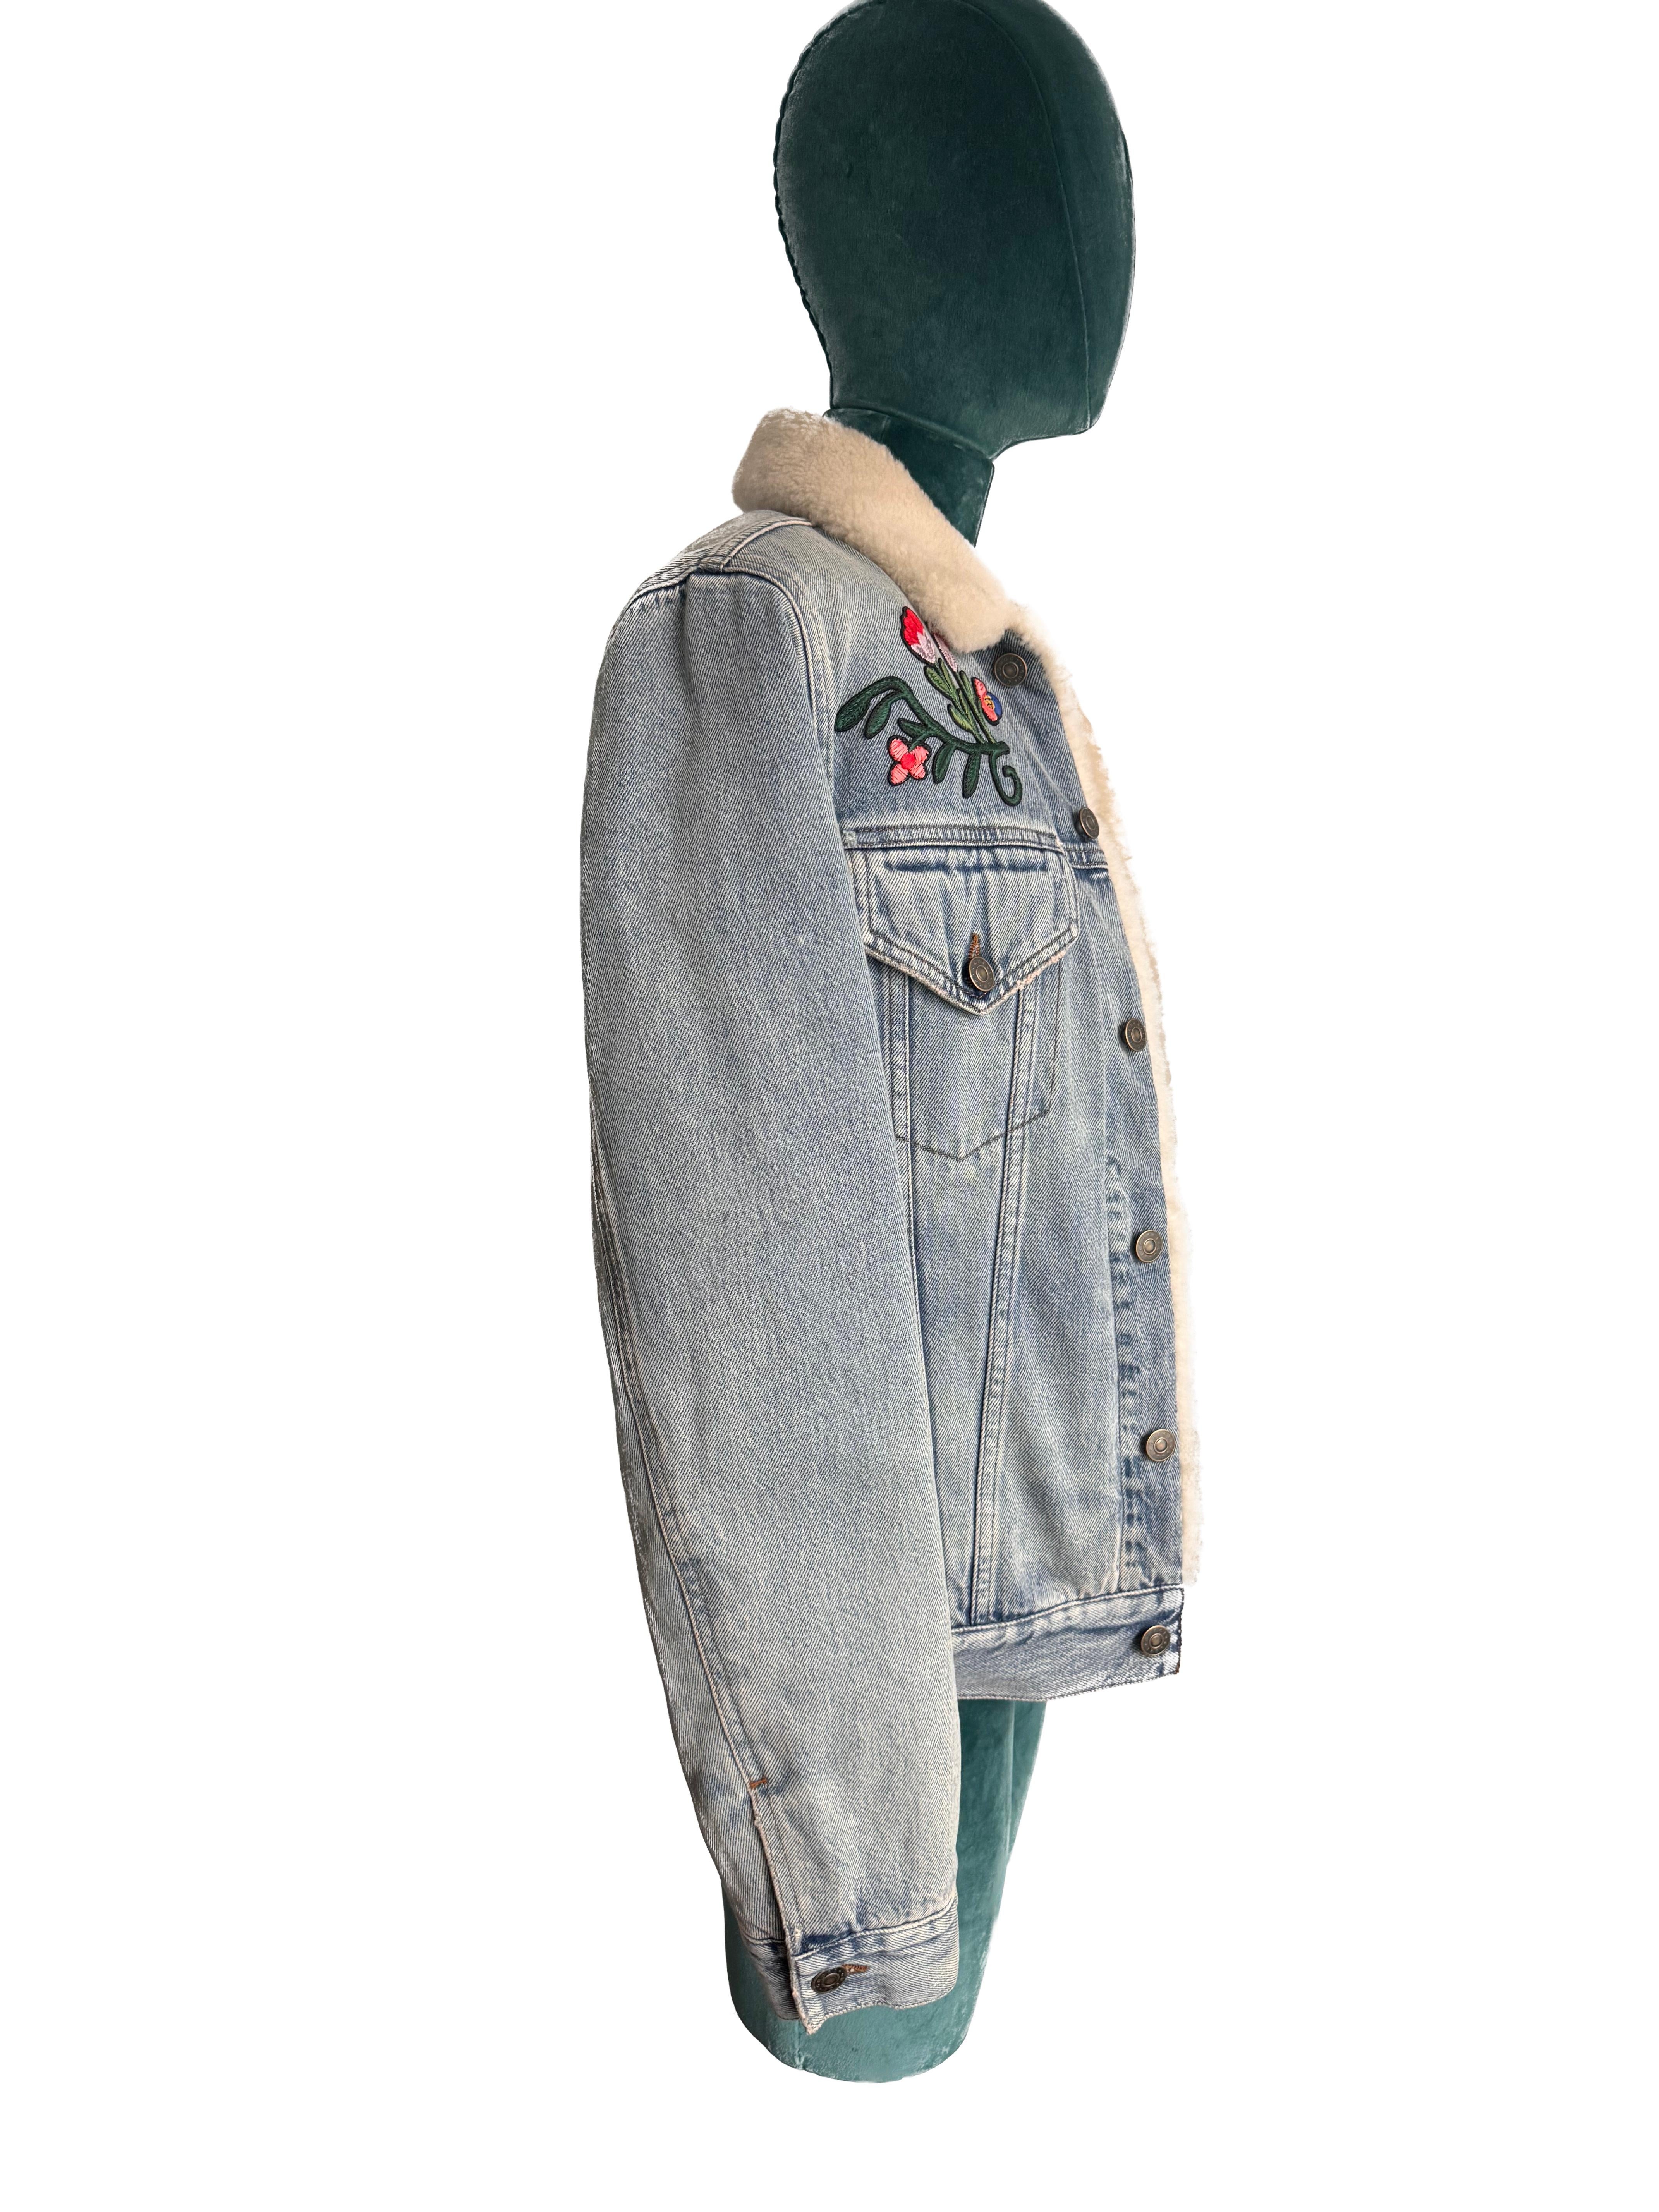 Elevate your style with the epitome of luxury and personalization – the Gucci DIY denim jacket. Crafted in Italy with meticulous attention to detail, this brand new, never-worn jacket redefines casual elegance and individuality.

This exquisite